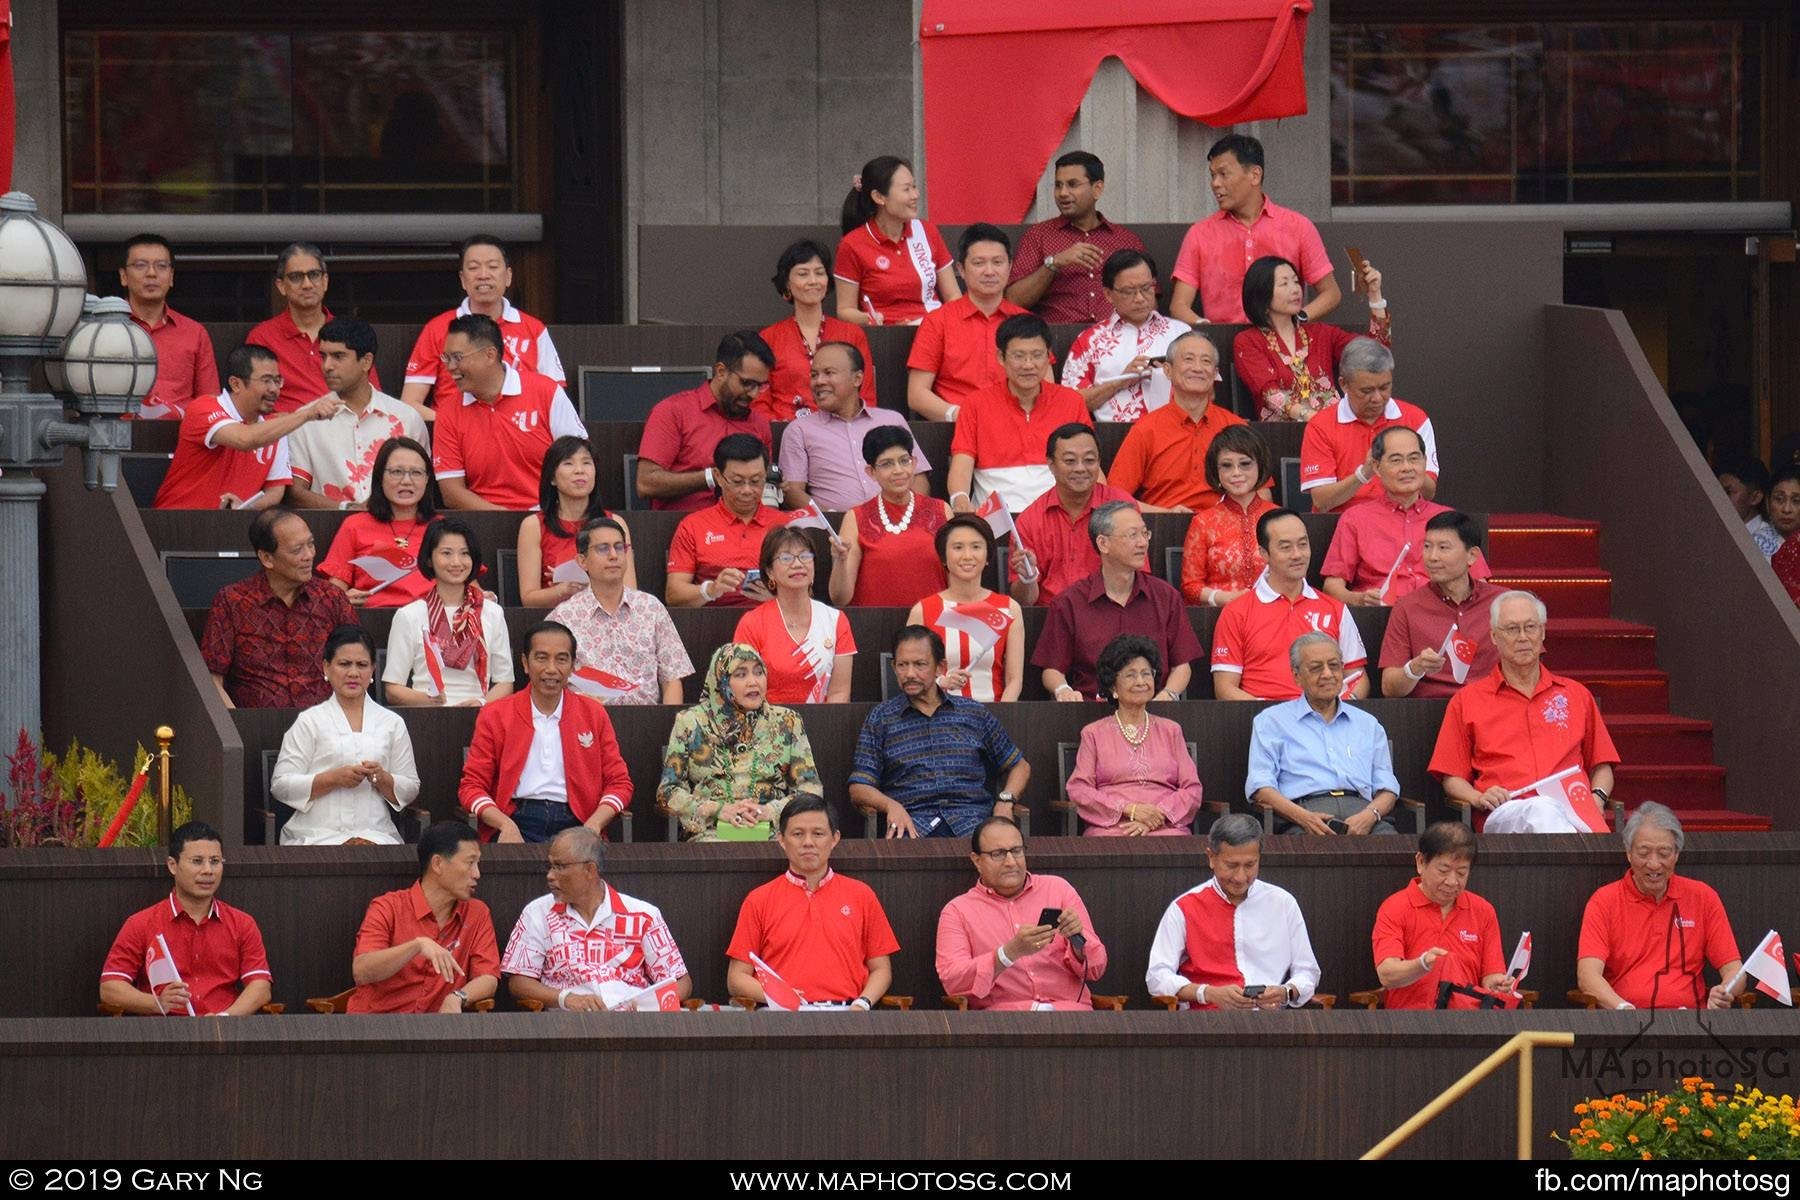 Indonesian President Joko Widodo, Brunei's Sultan Hassanal Bolkiah and Malaysian Prime Minister Mahathir Mohamad are special guests at NDP2019